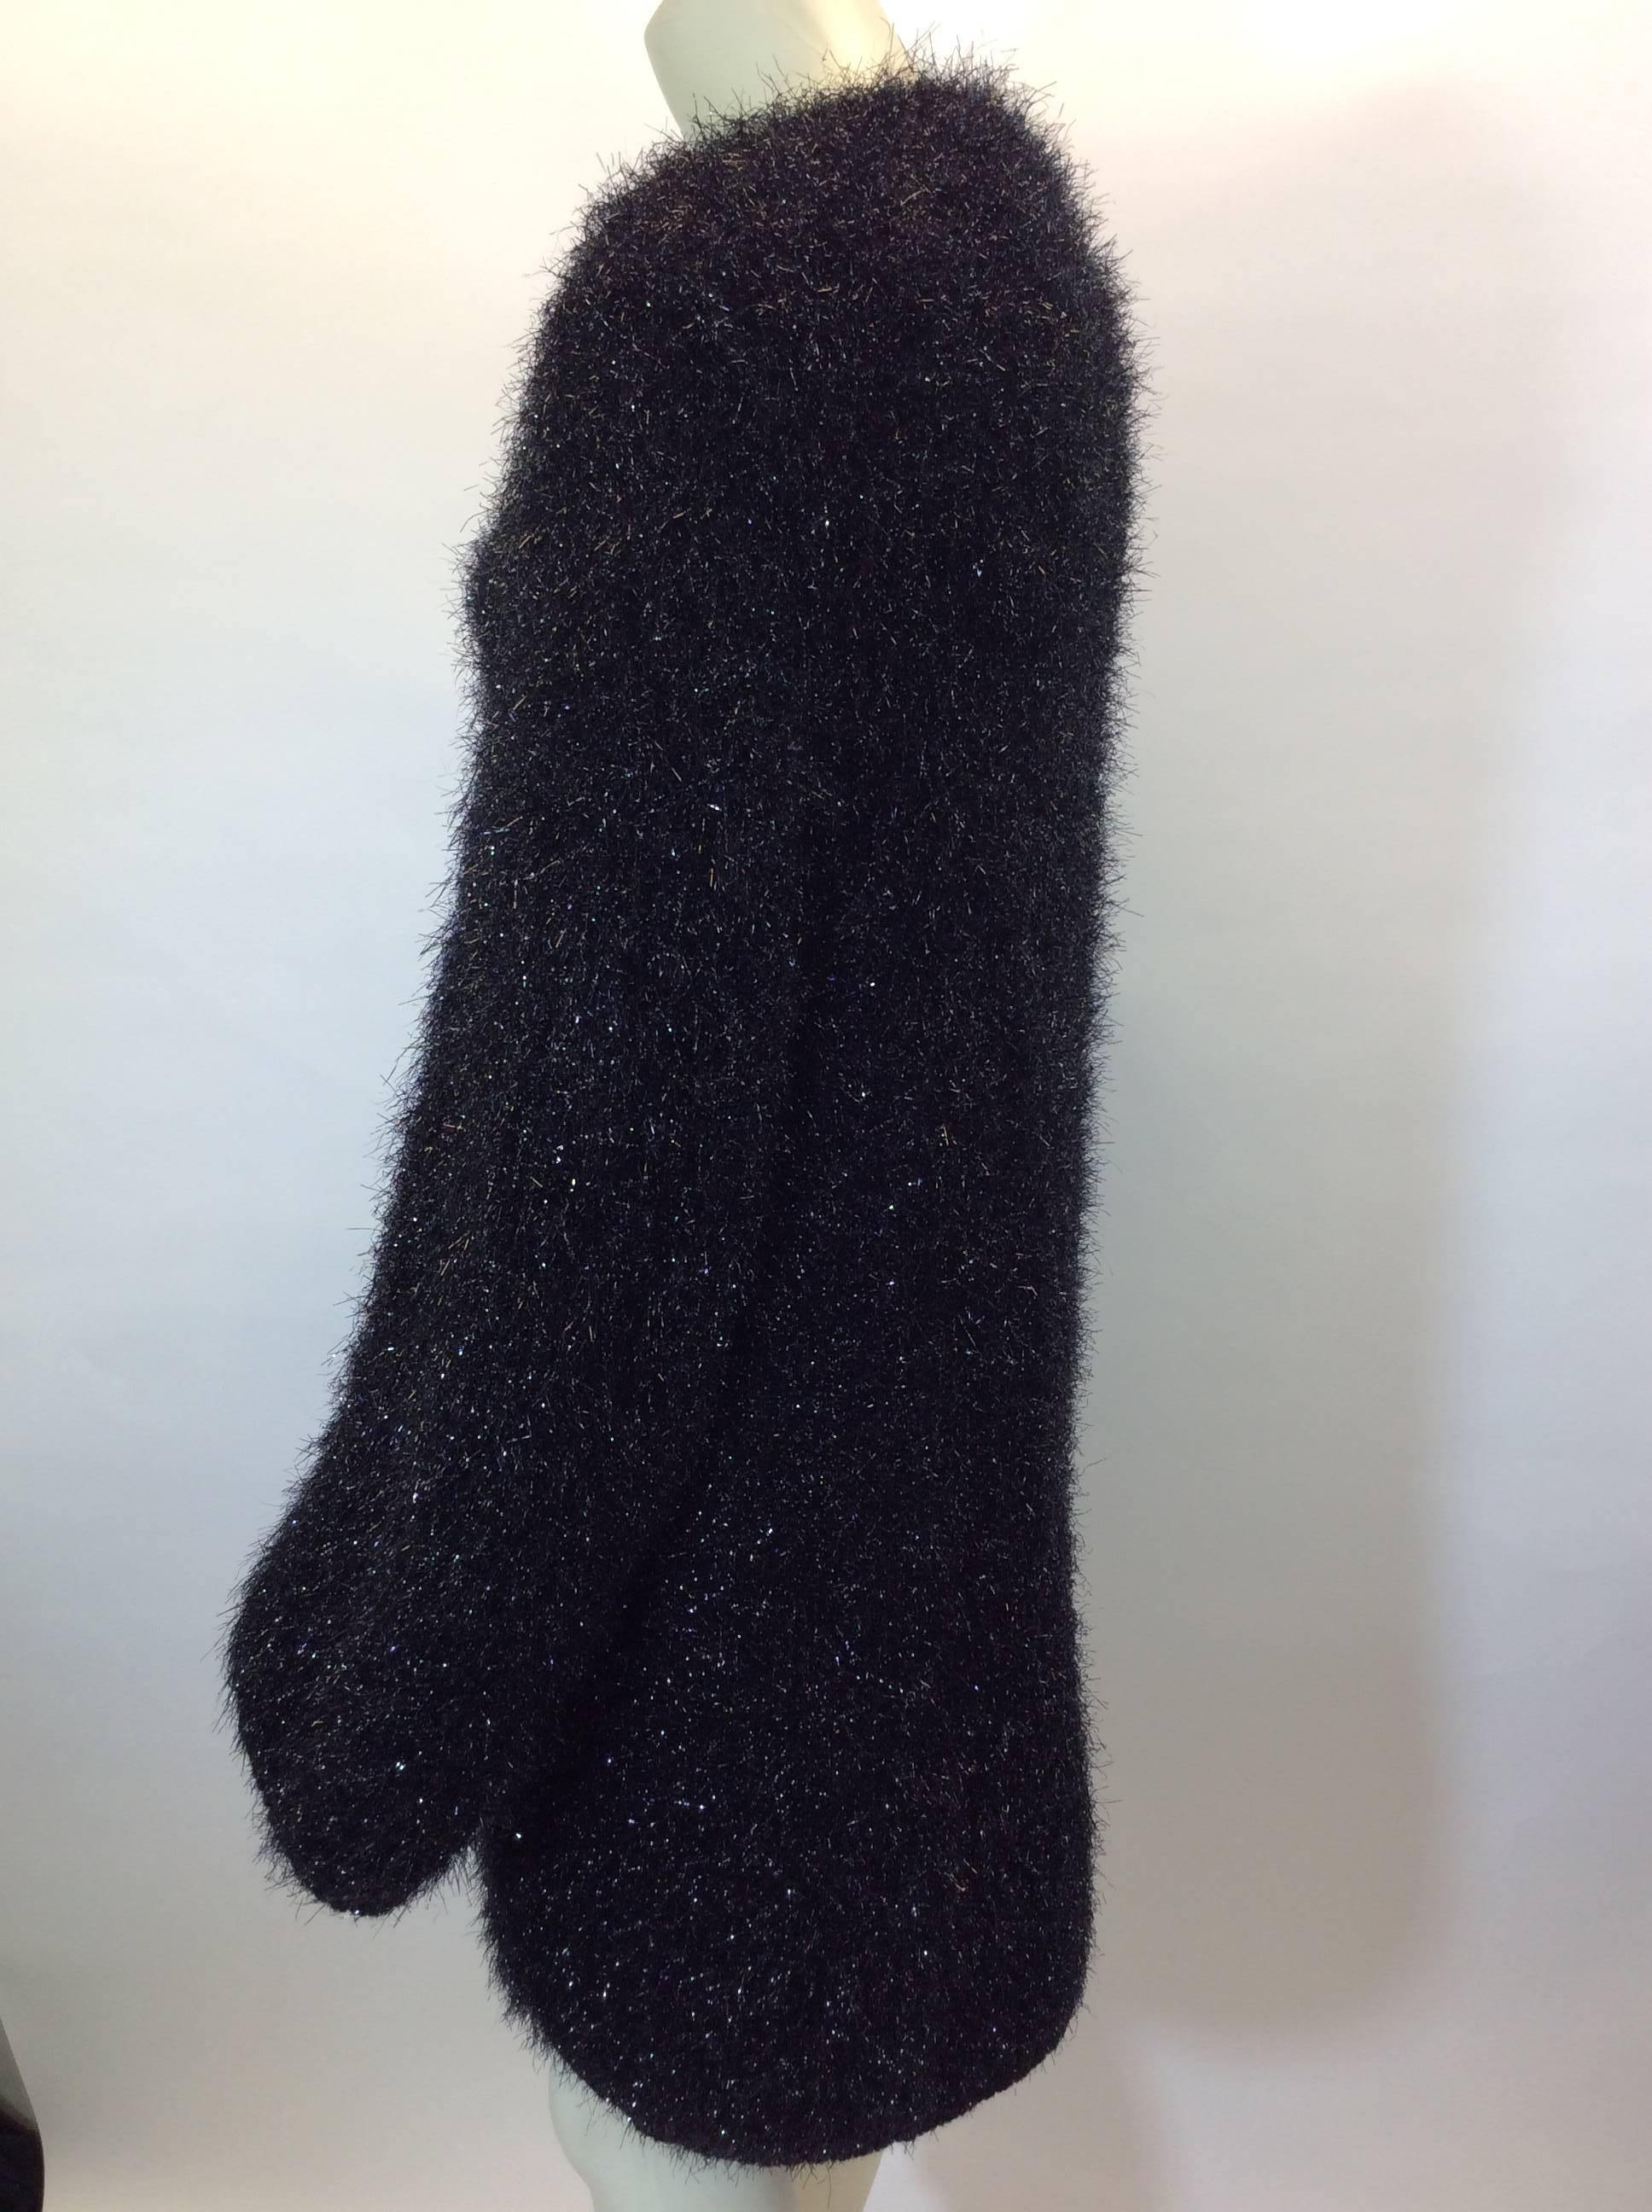 Black Fuzz Coat
3 snap front closure
Features two hip pockets
Fuzzy texture is reflective in different lights
Knee length
Fabric has stretch
Size Medium
85% Polyamide, 10% Wool, 5% Cashmere